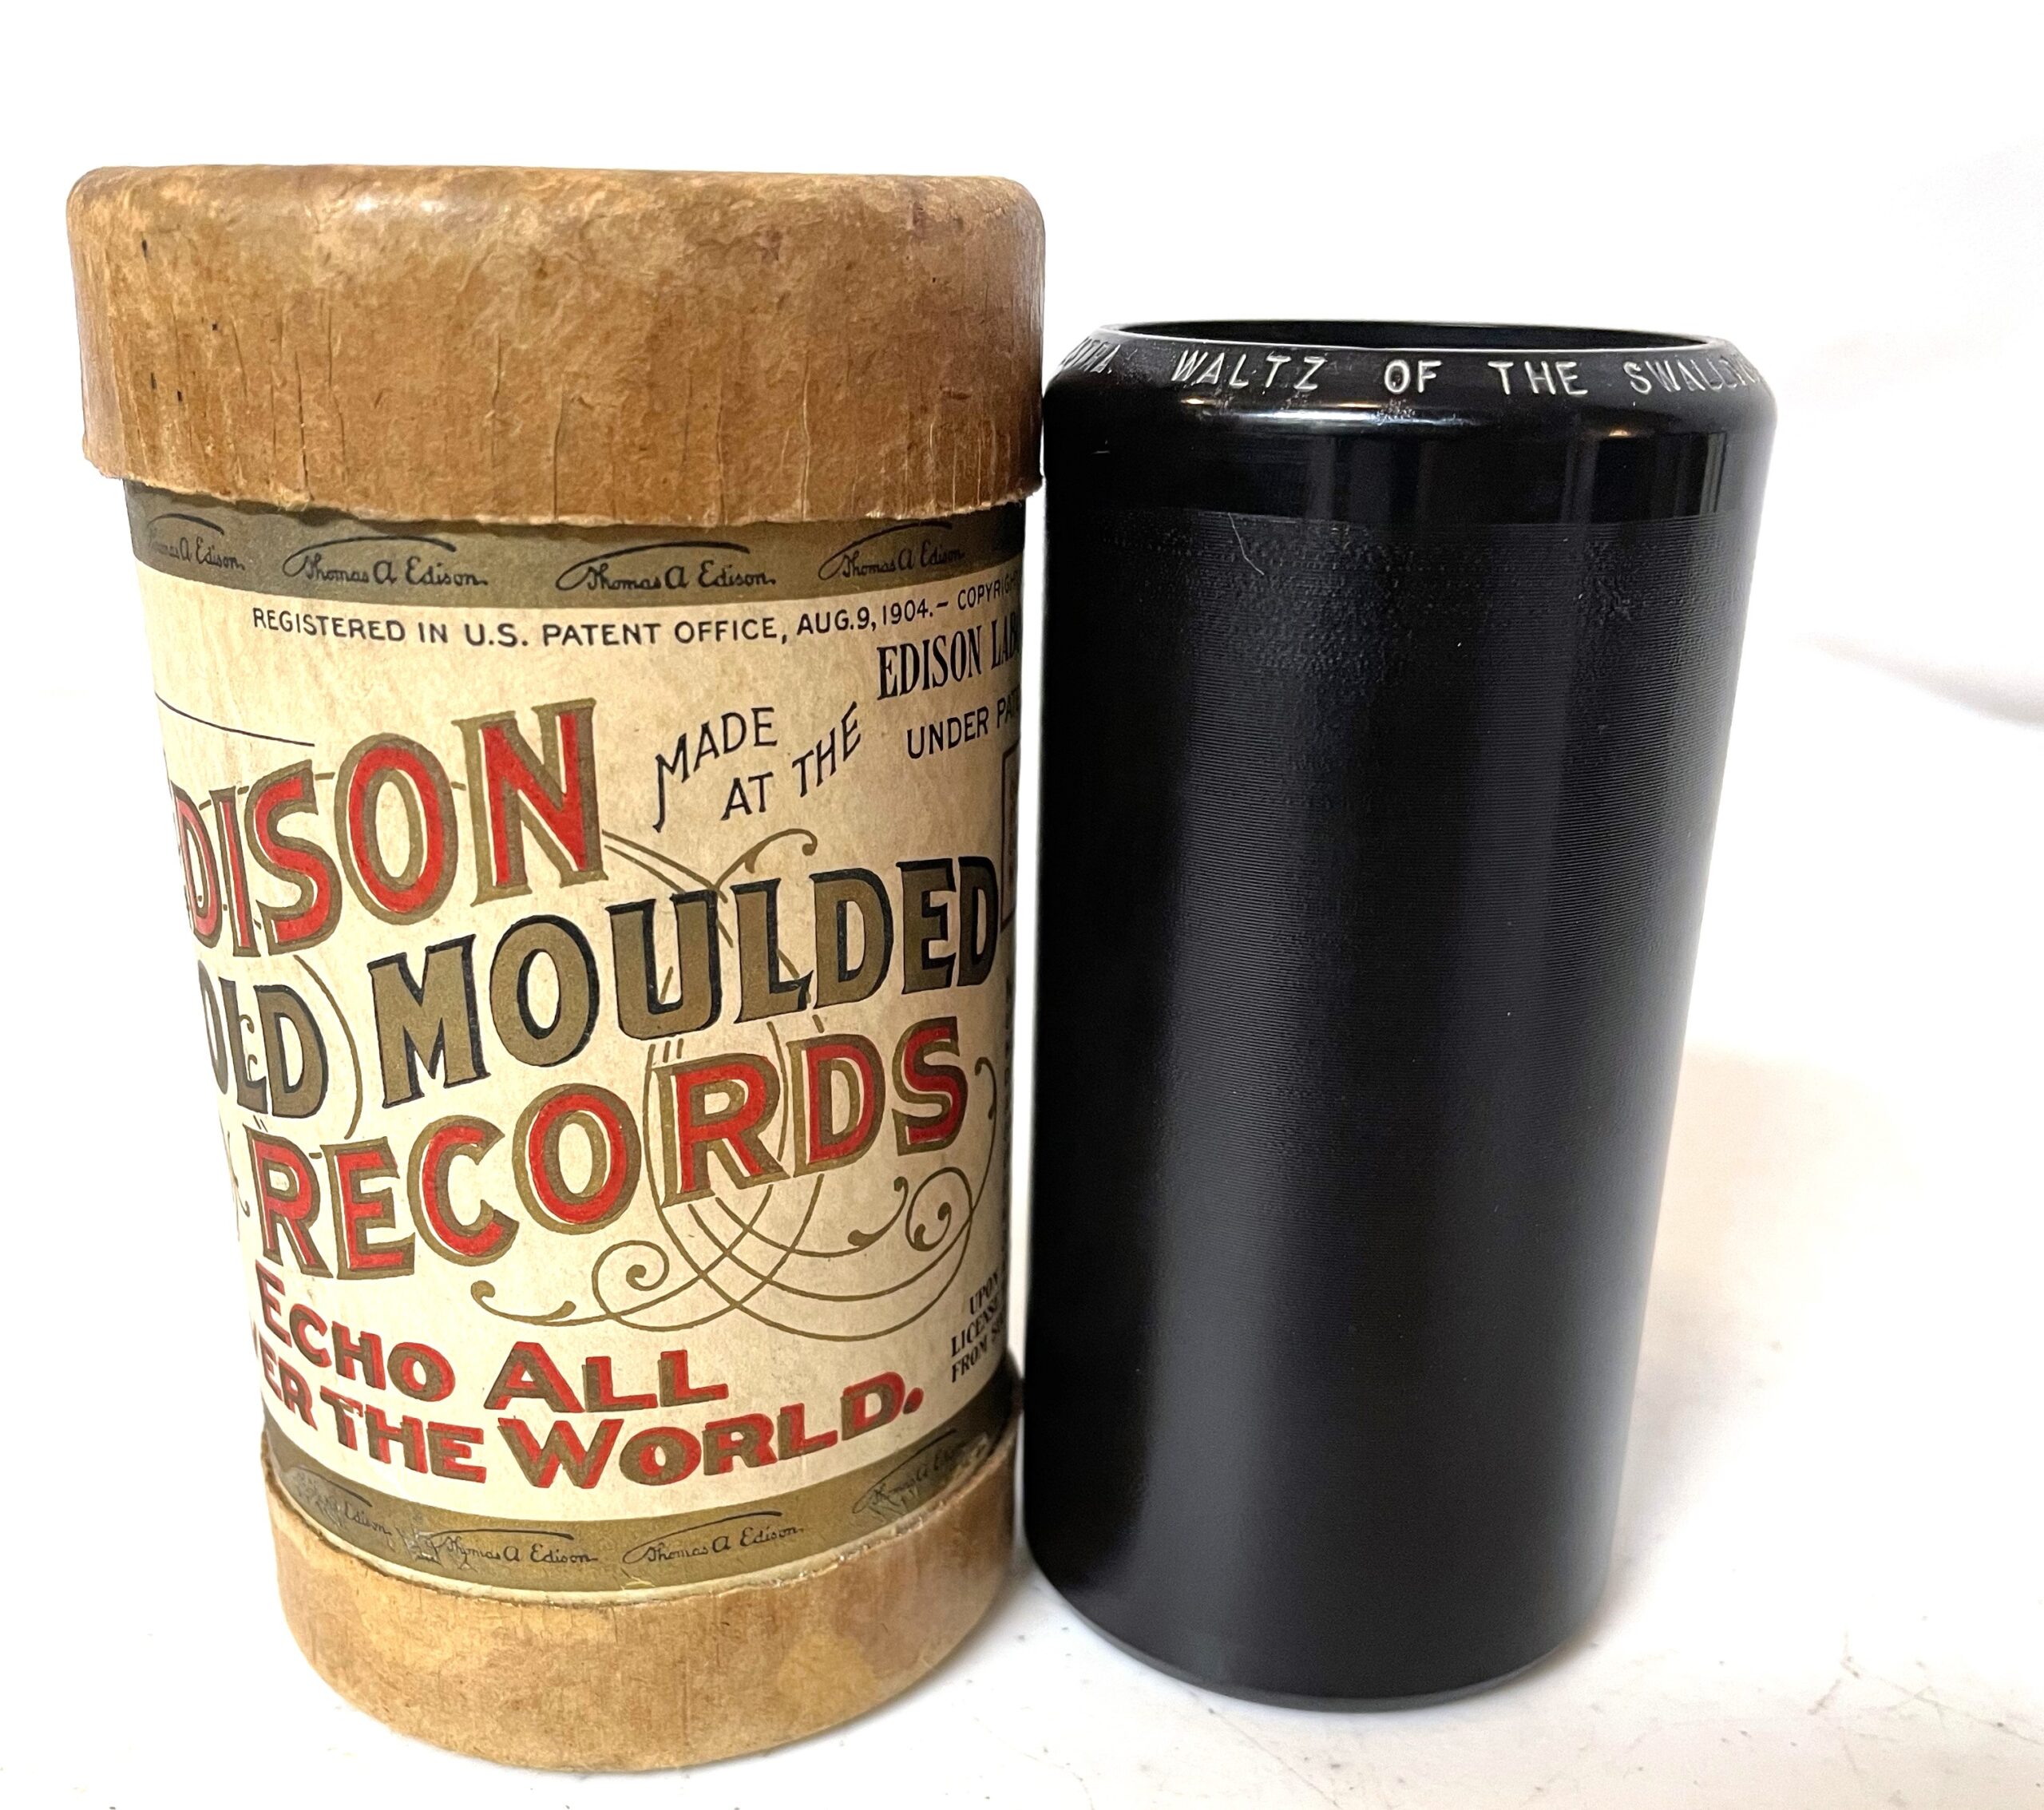 Edison 2-minute Cylinder…”I Played My Concertina” (Comic Song)